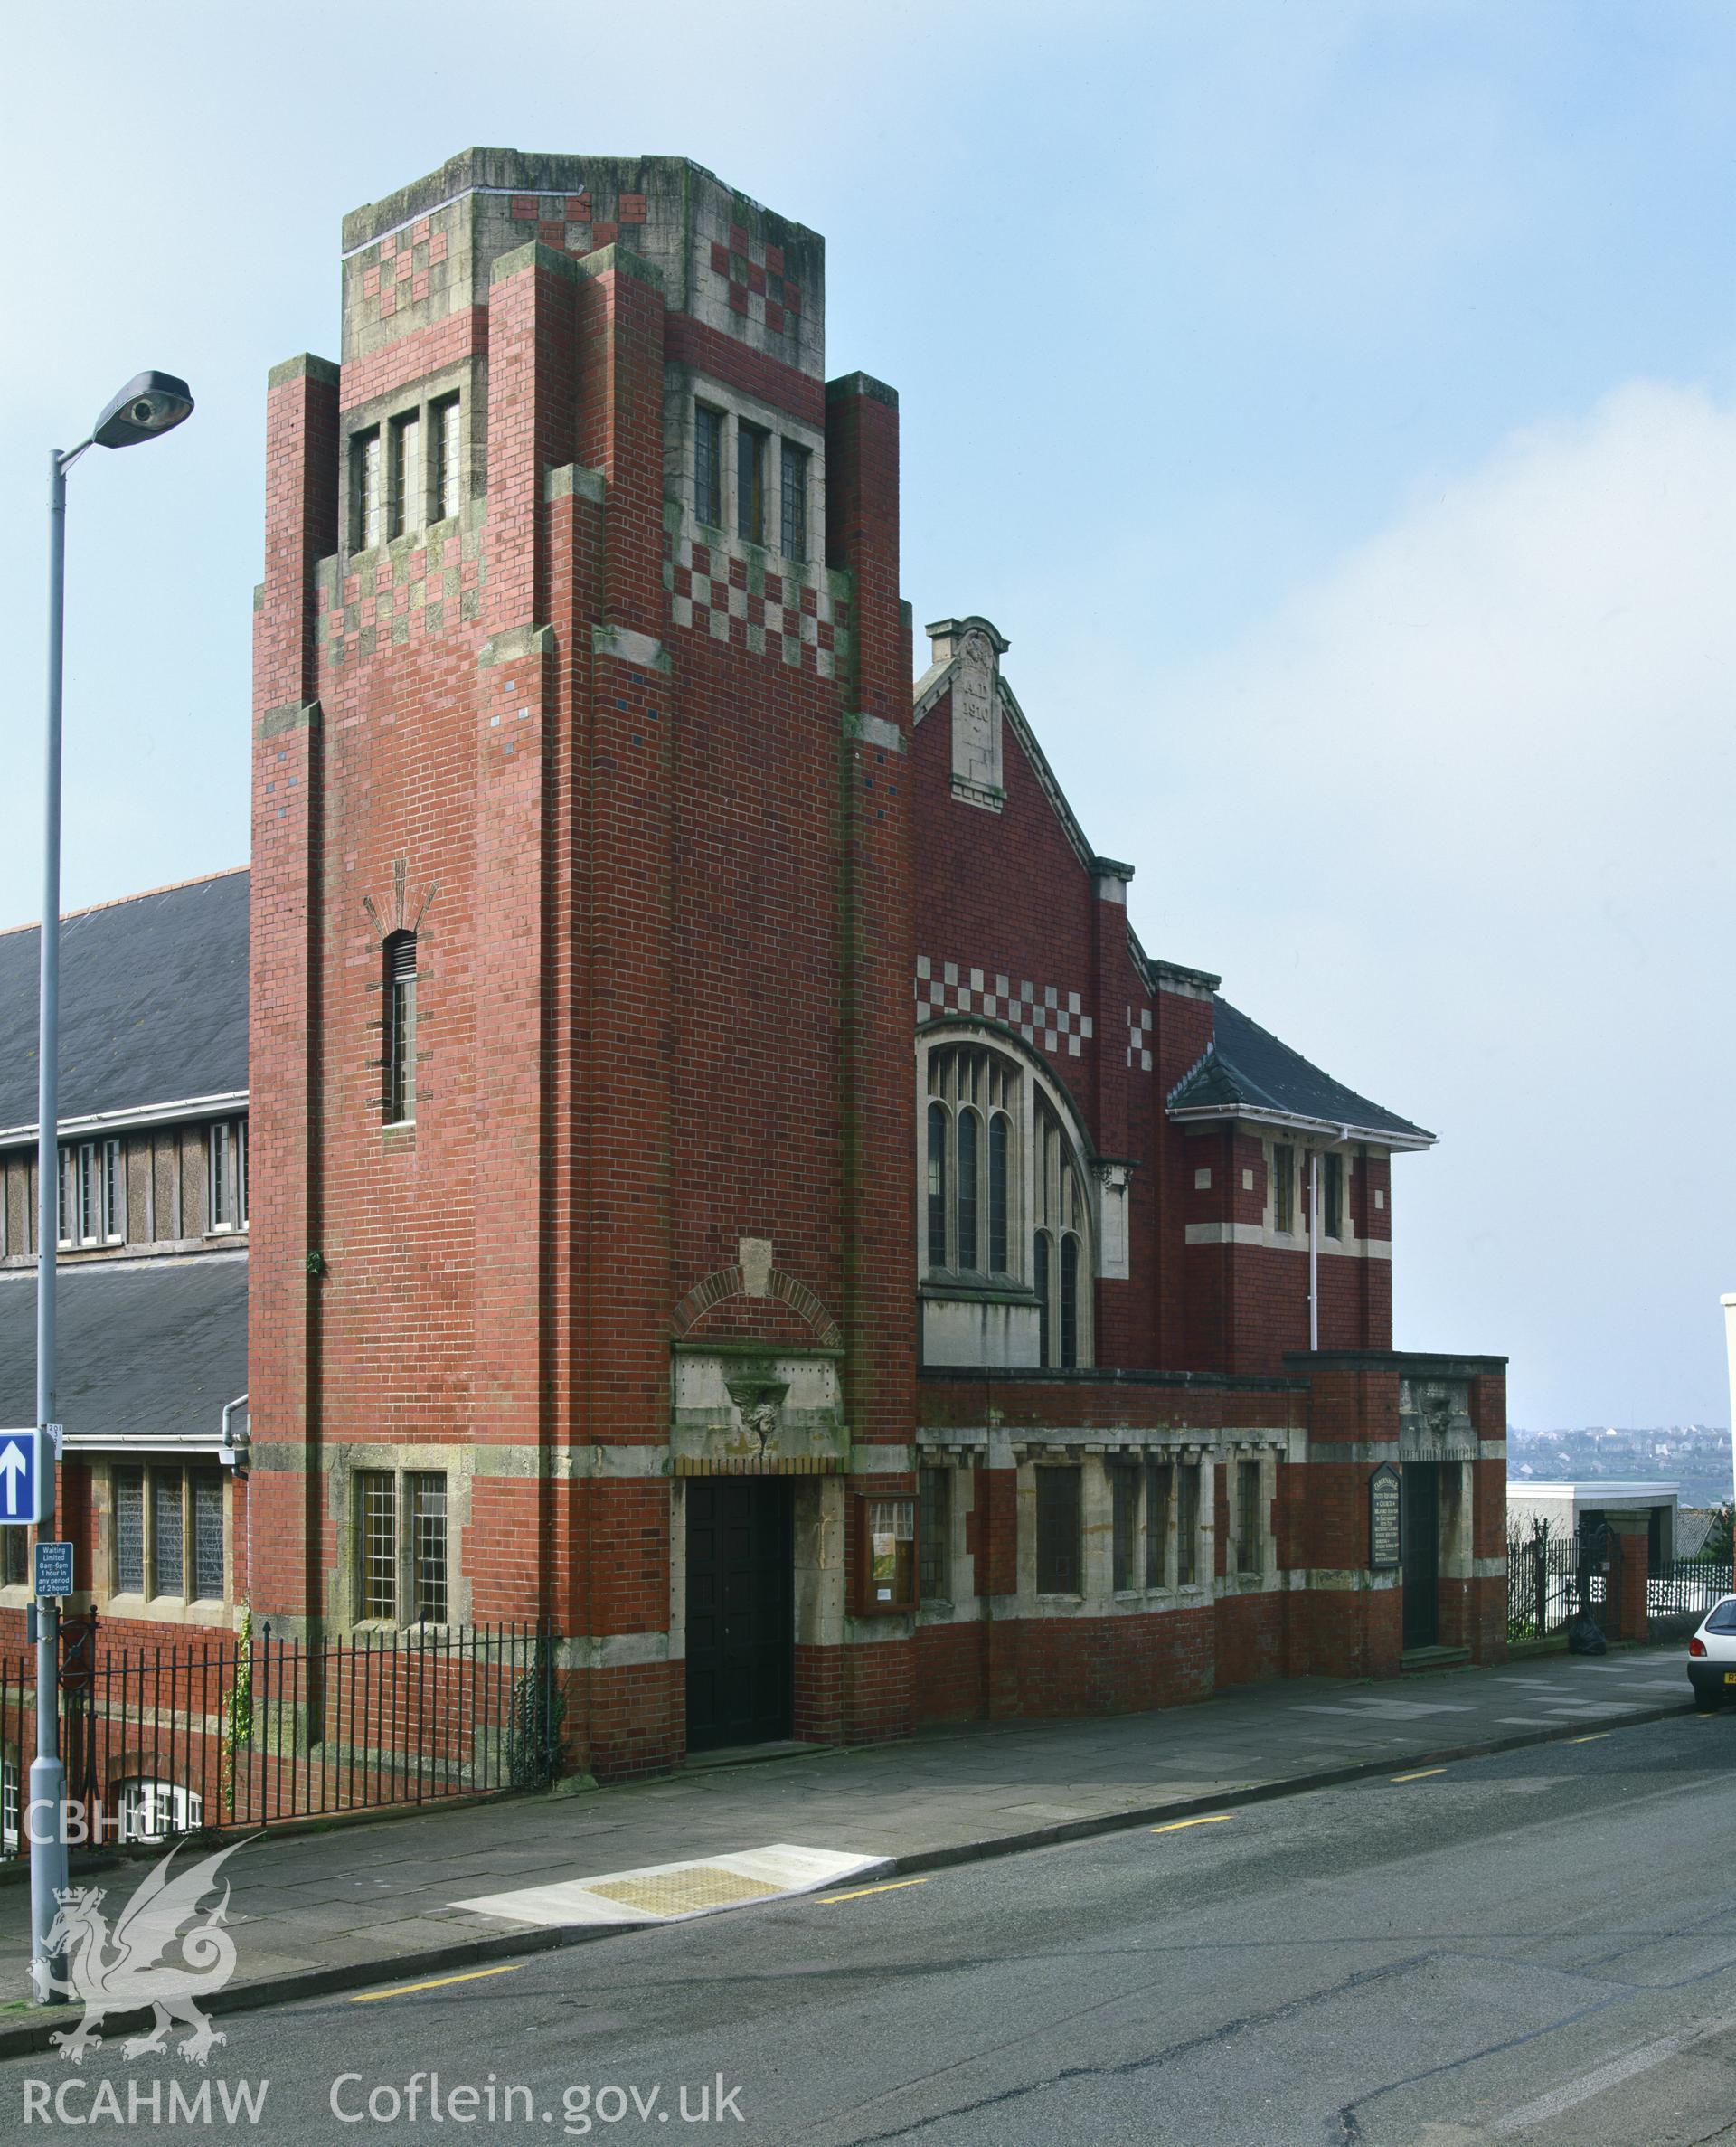 RCAHMW colour transparency showing an exterior view of Tabernacle Chapel, Milford Haven, taken by Iain Wright, 2003.